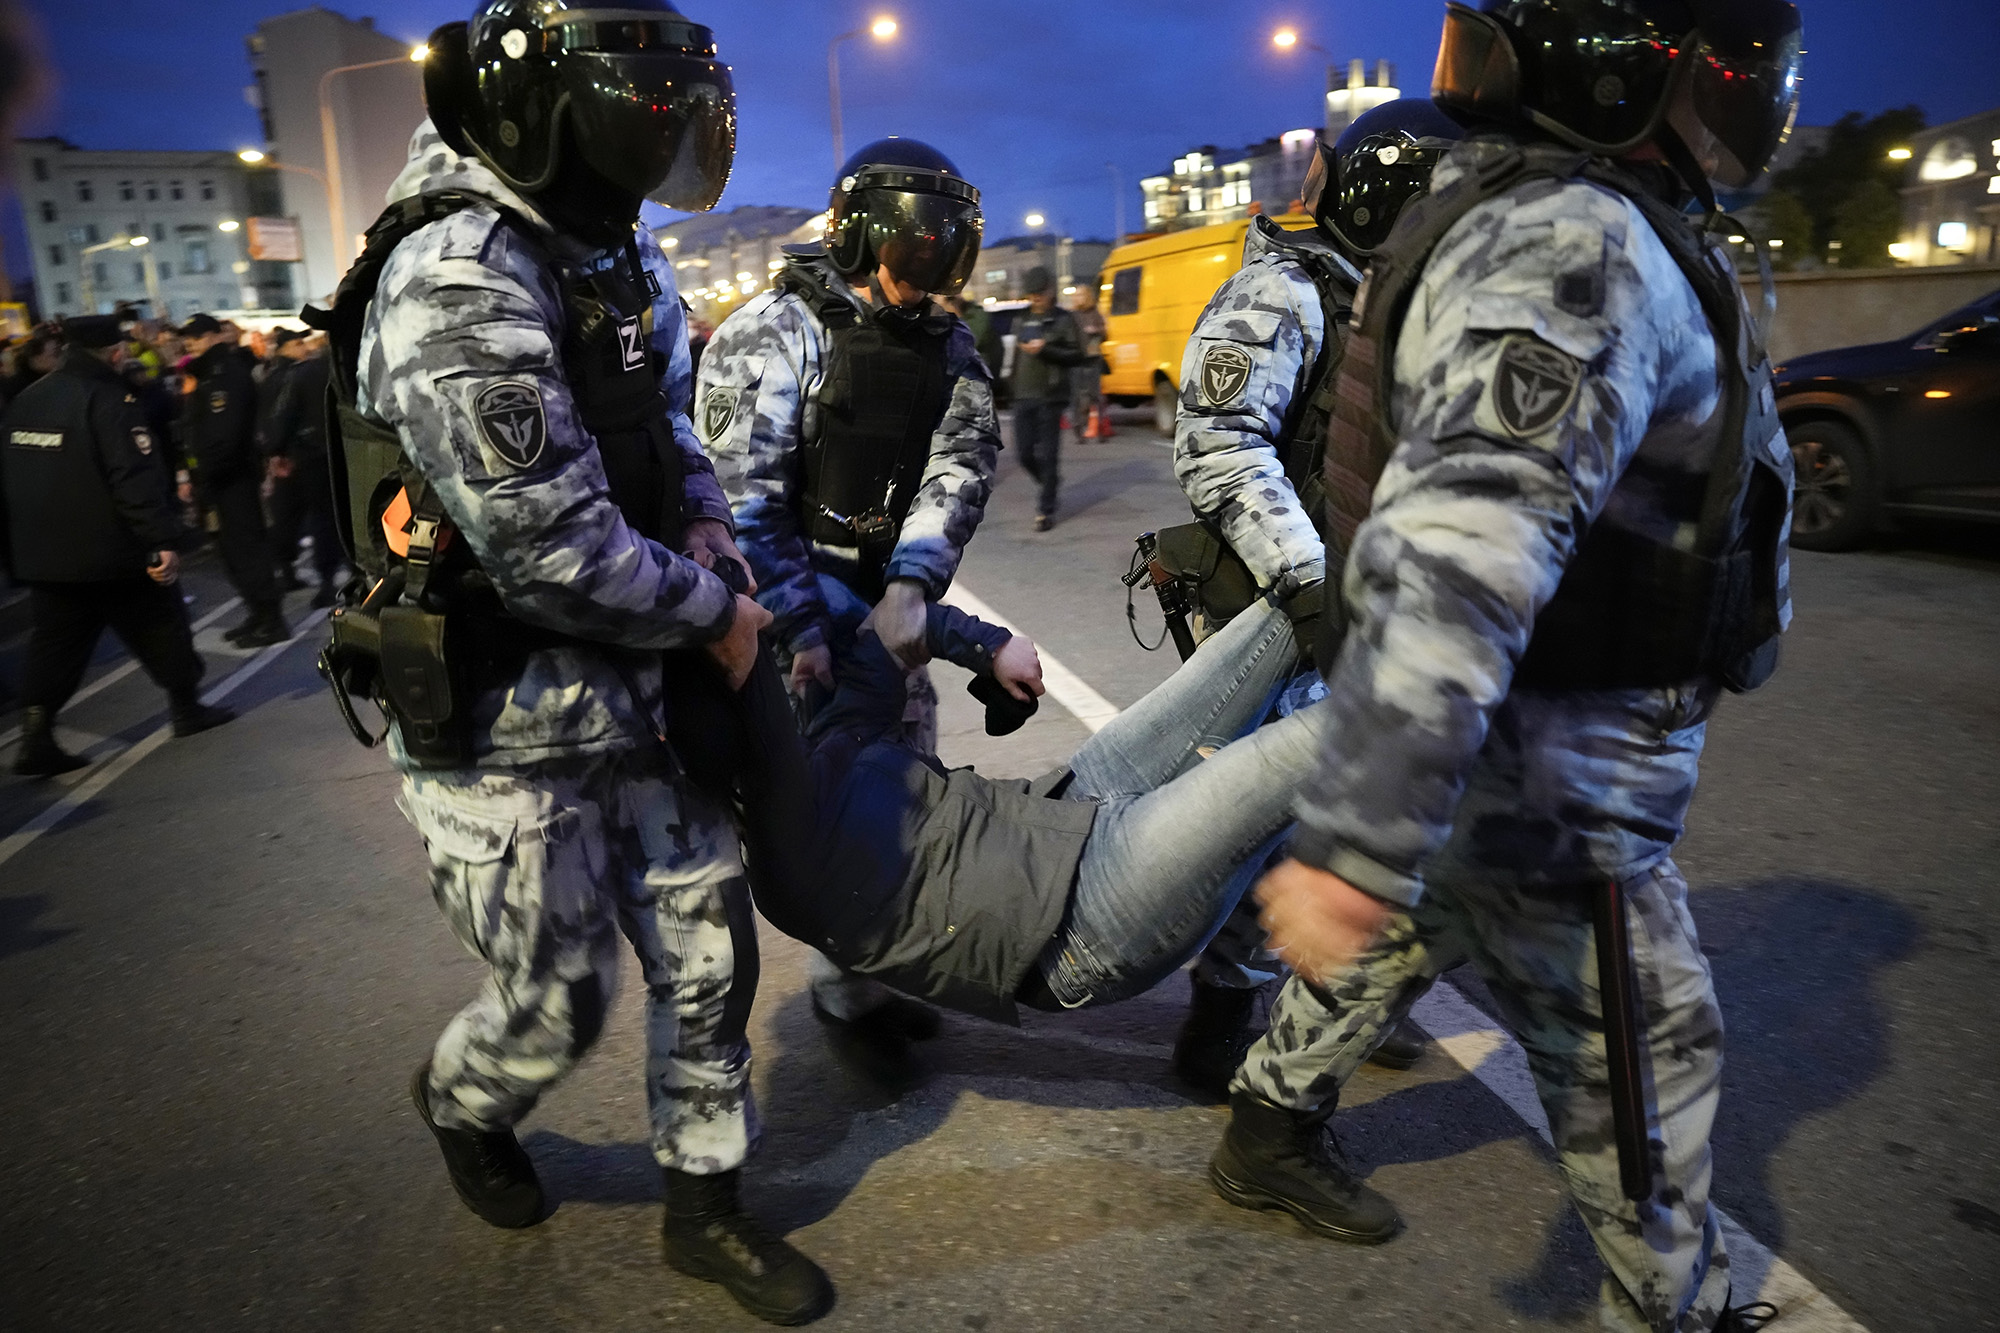 Riot police detain a demonstrator during a protest against mobilization in Moscow on Wednesday, Sept. 21.